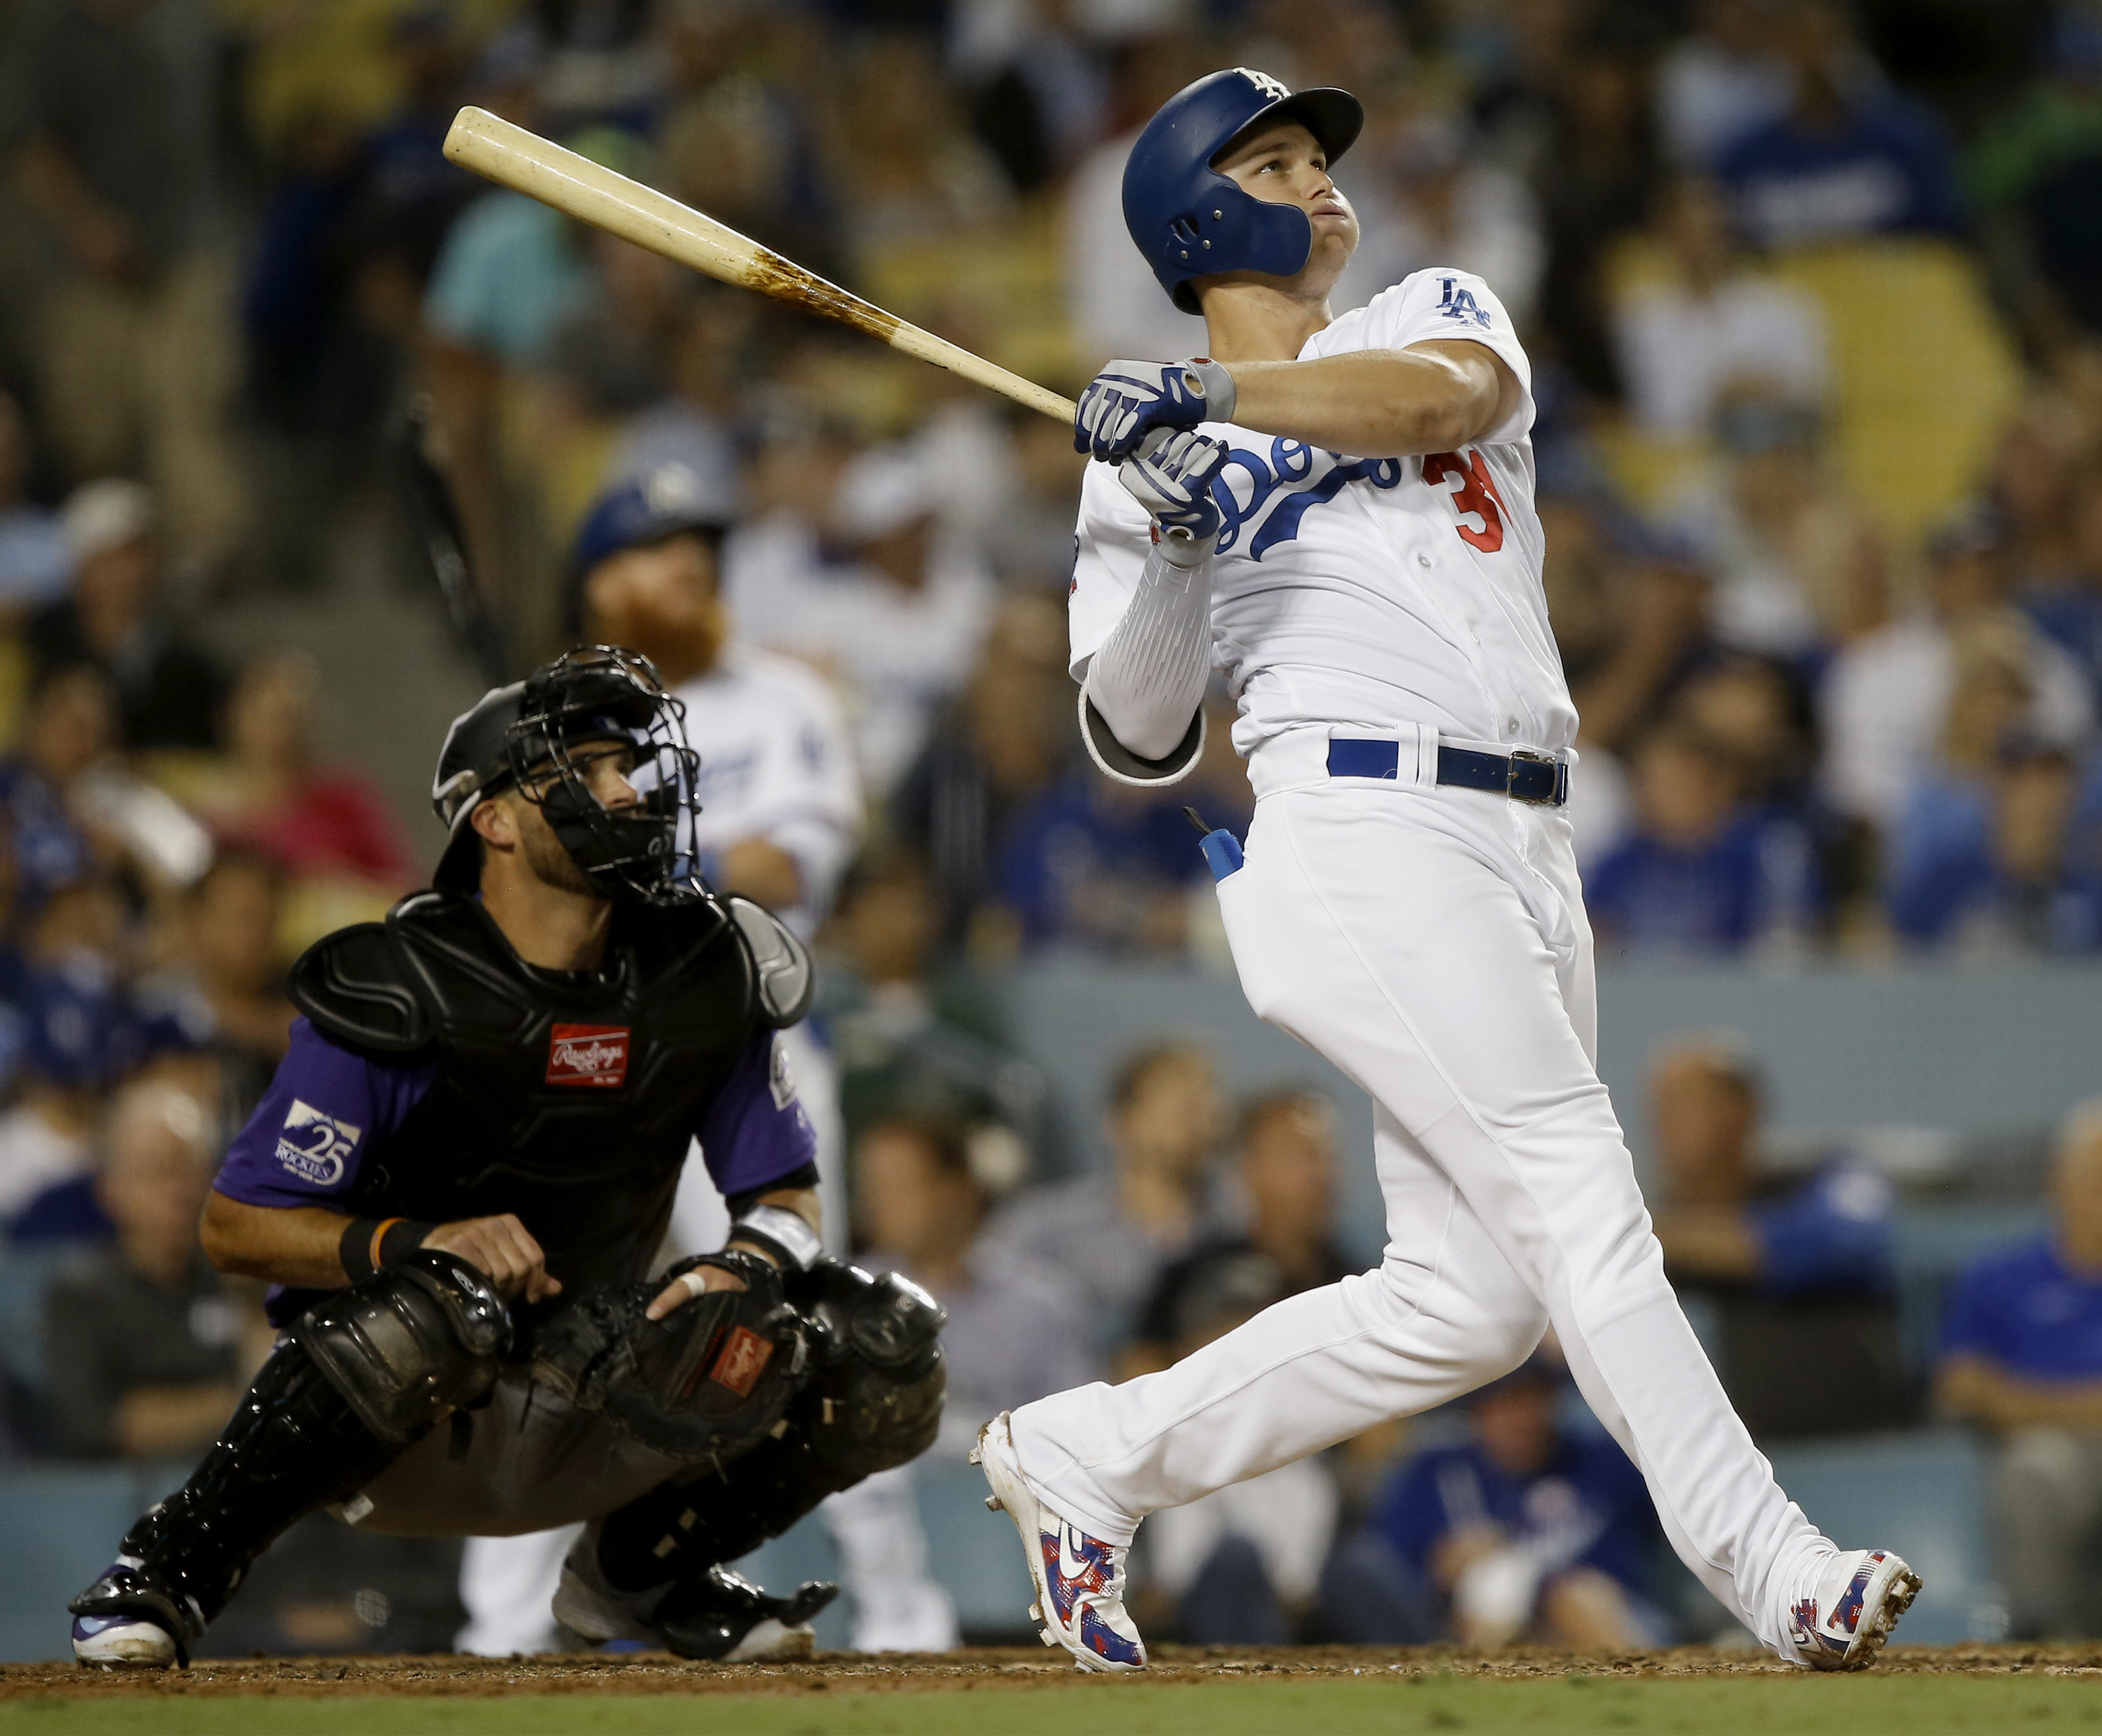 Dodgers top Rockies 8-2, move back into 1st in NL West